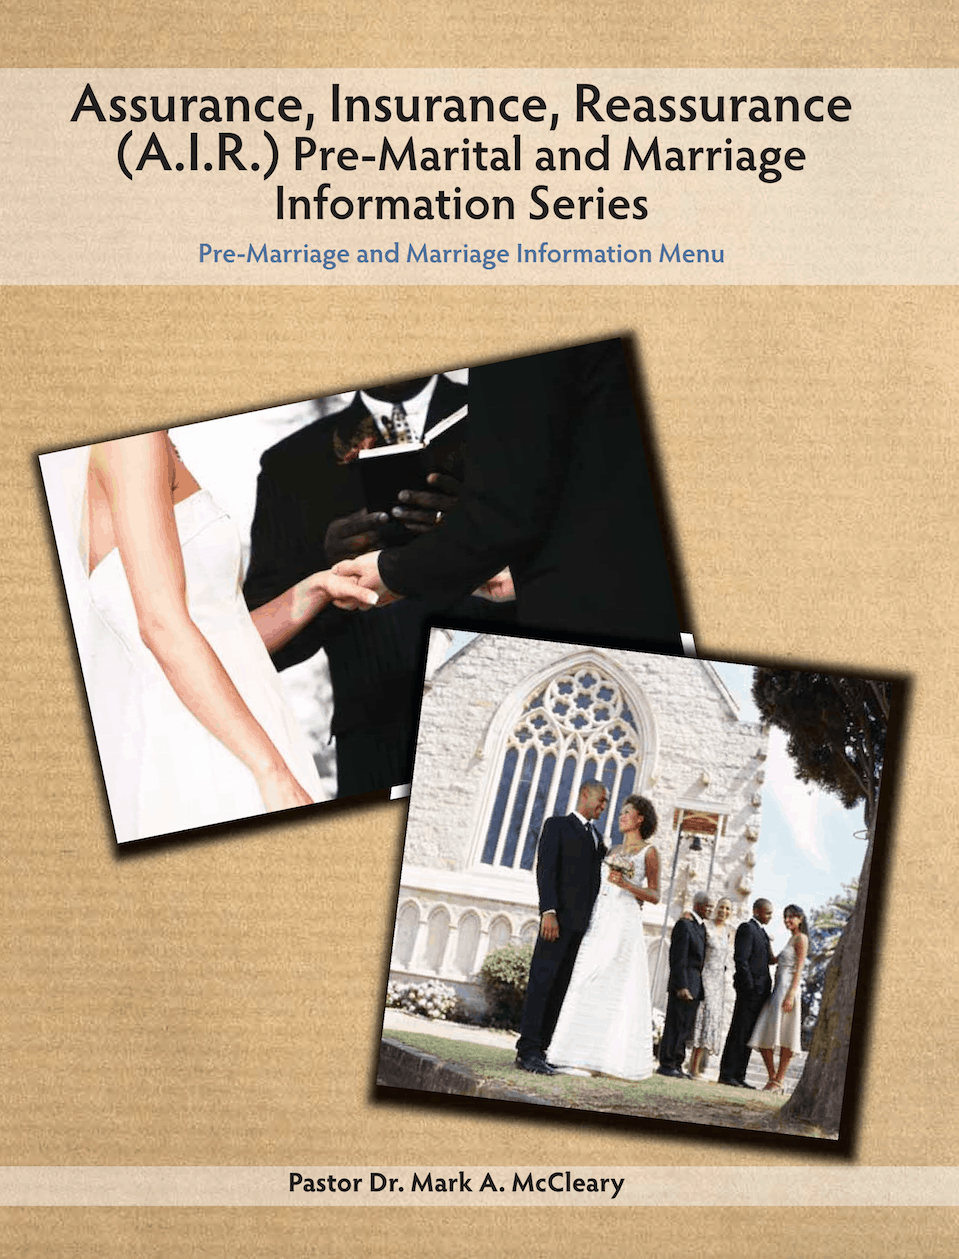 Assurance, Insurance, Reassurance (A.I.R.) Pre-Marital and Marriage Information Series